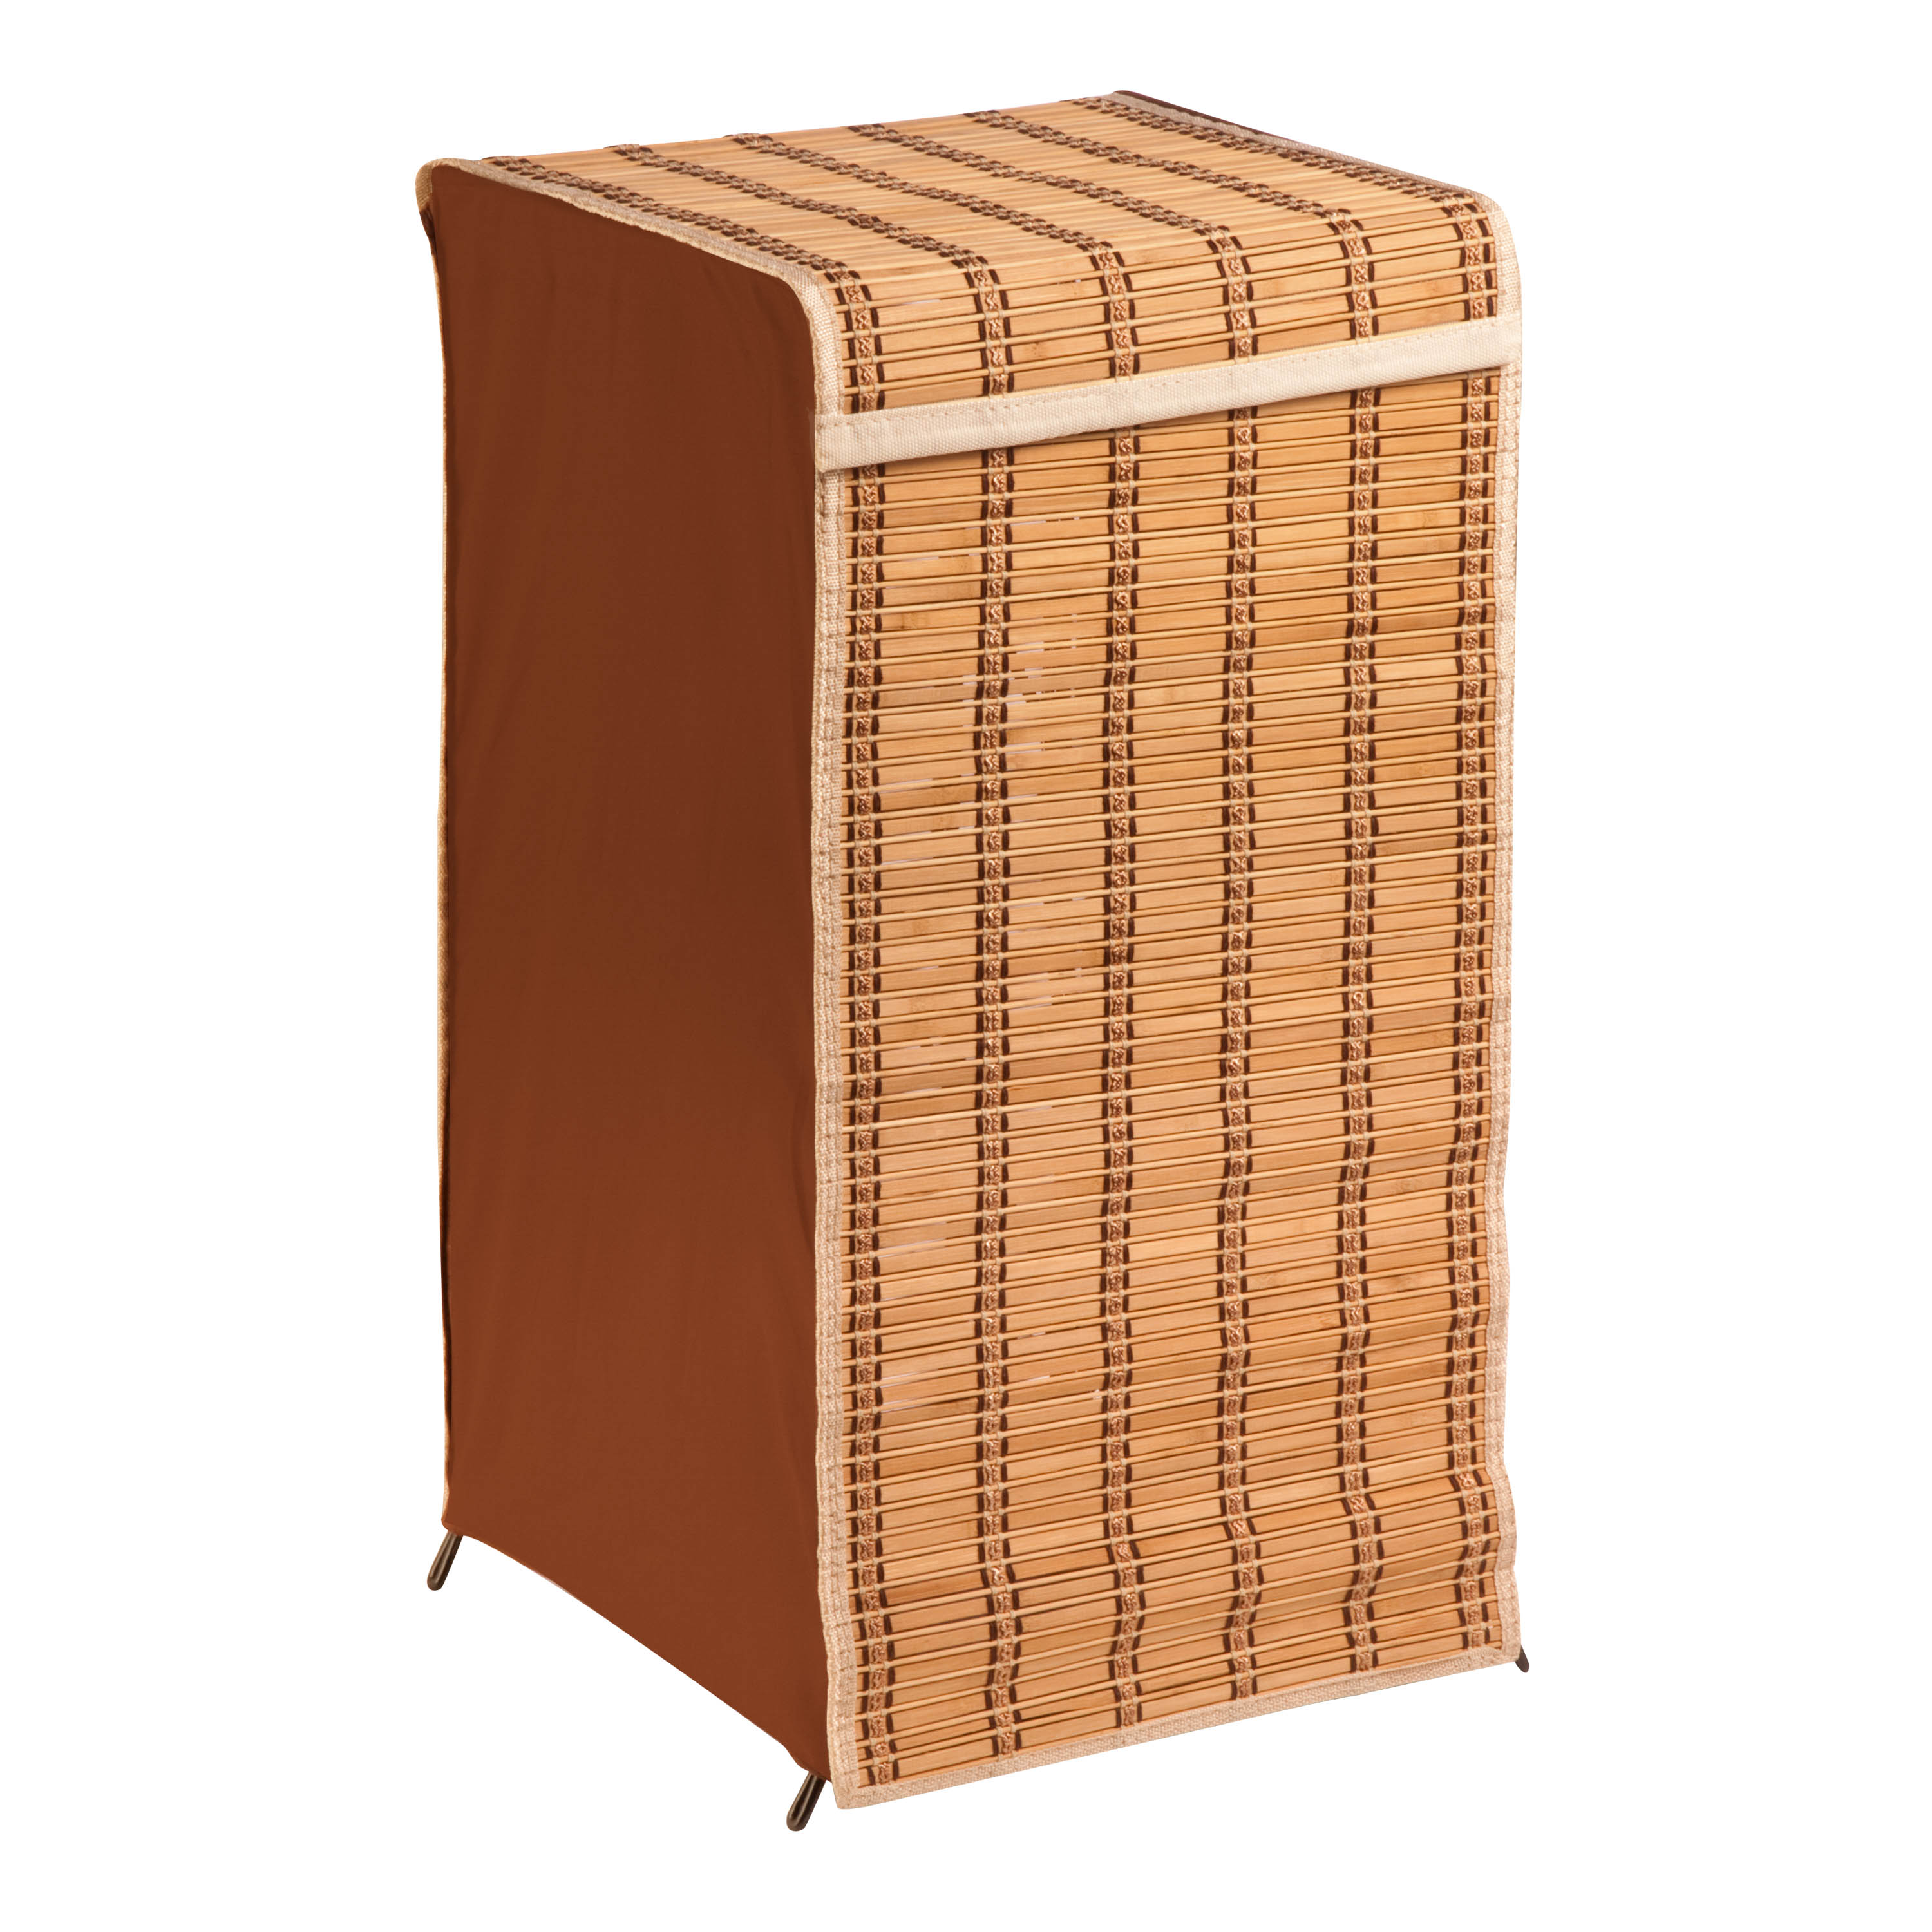 Honey-Can-Do Bamboo Wicker Laundry Hamper with Lid, Natural - image 4 of 5